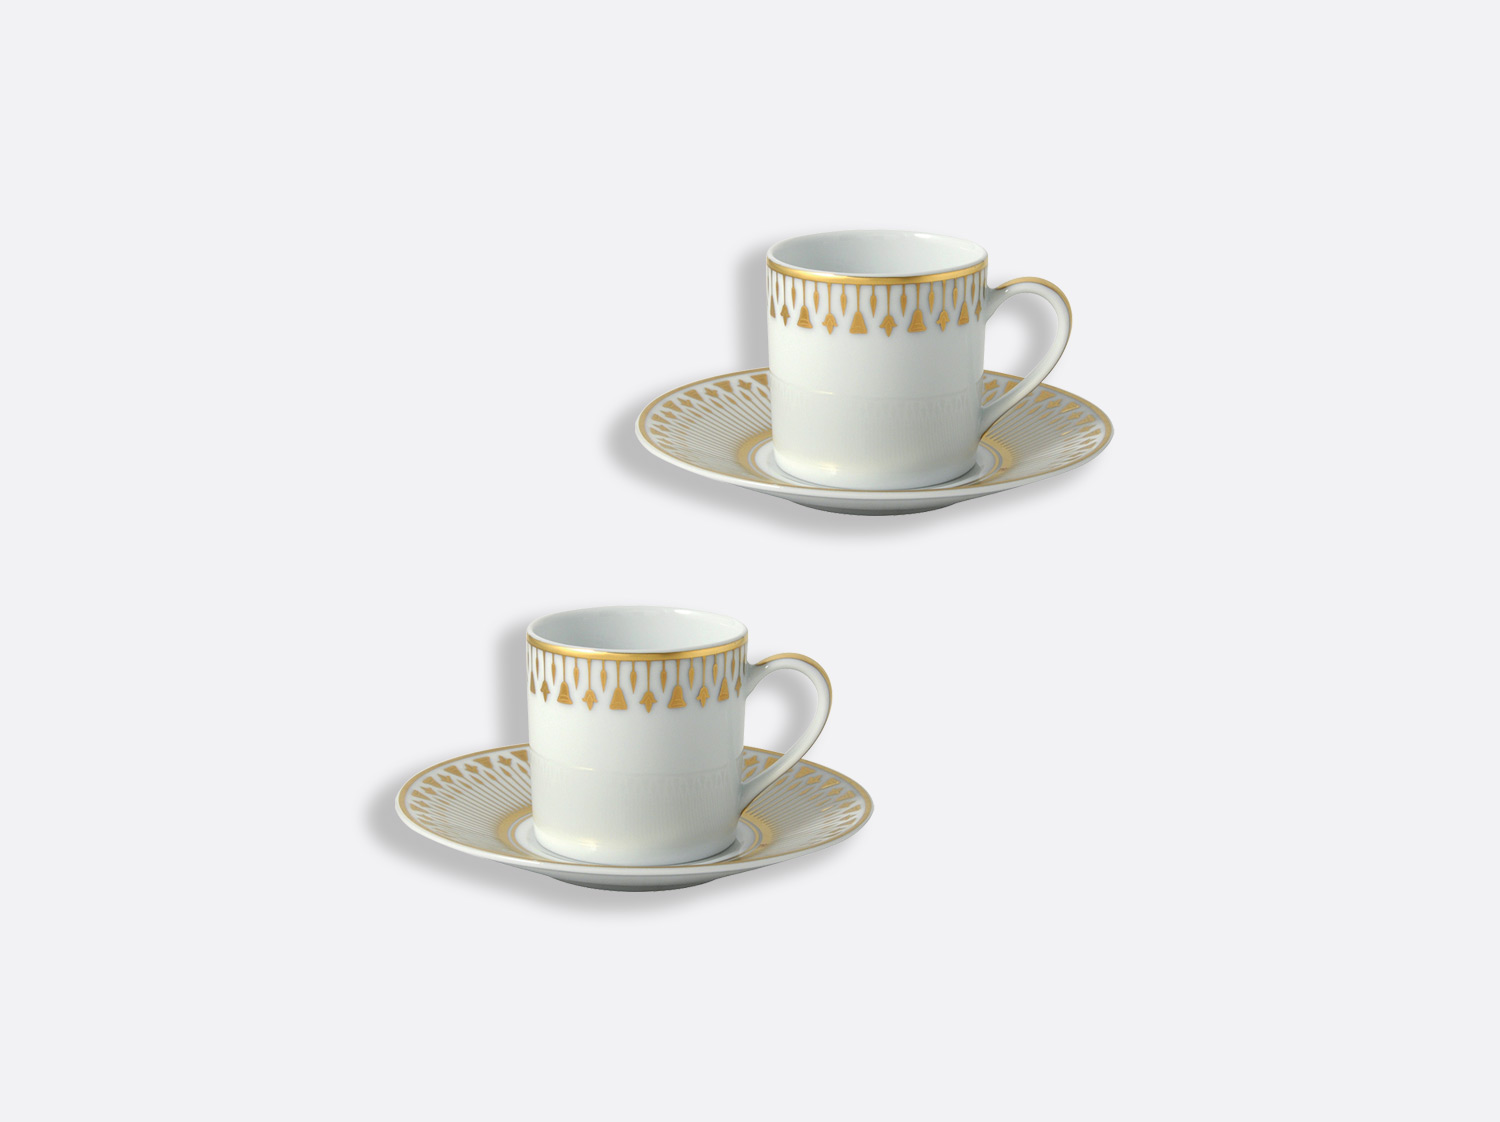 China Espresso cup and saucer gift box - 3 oz - Set of 2 of the collection Soleil levant | Bernardaud